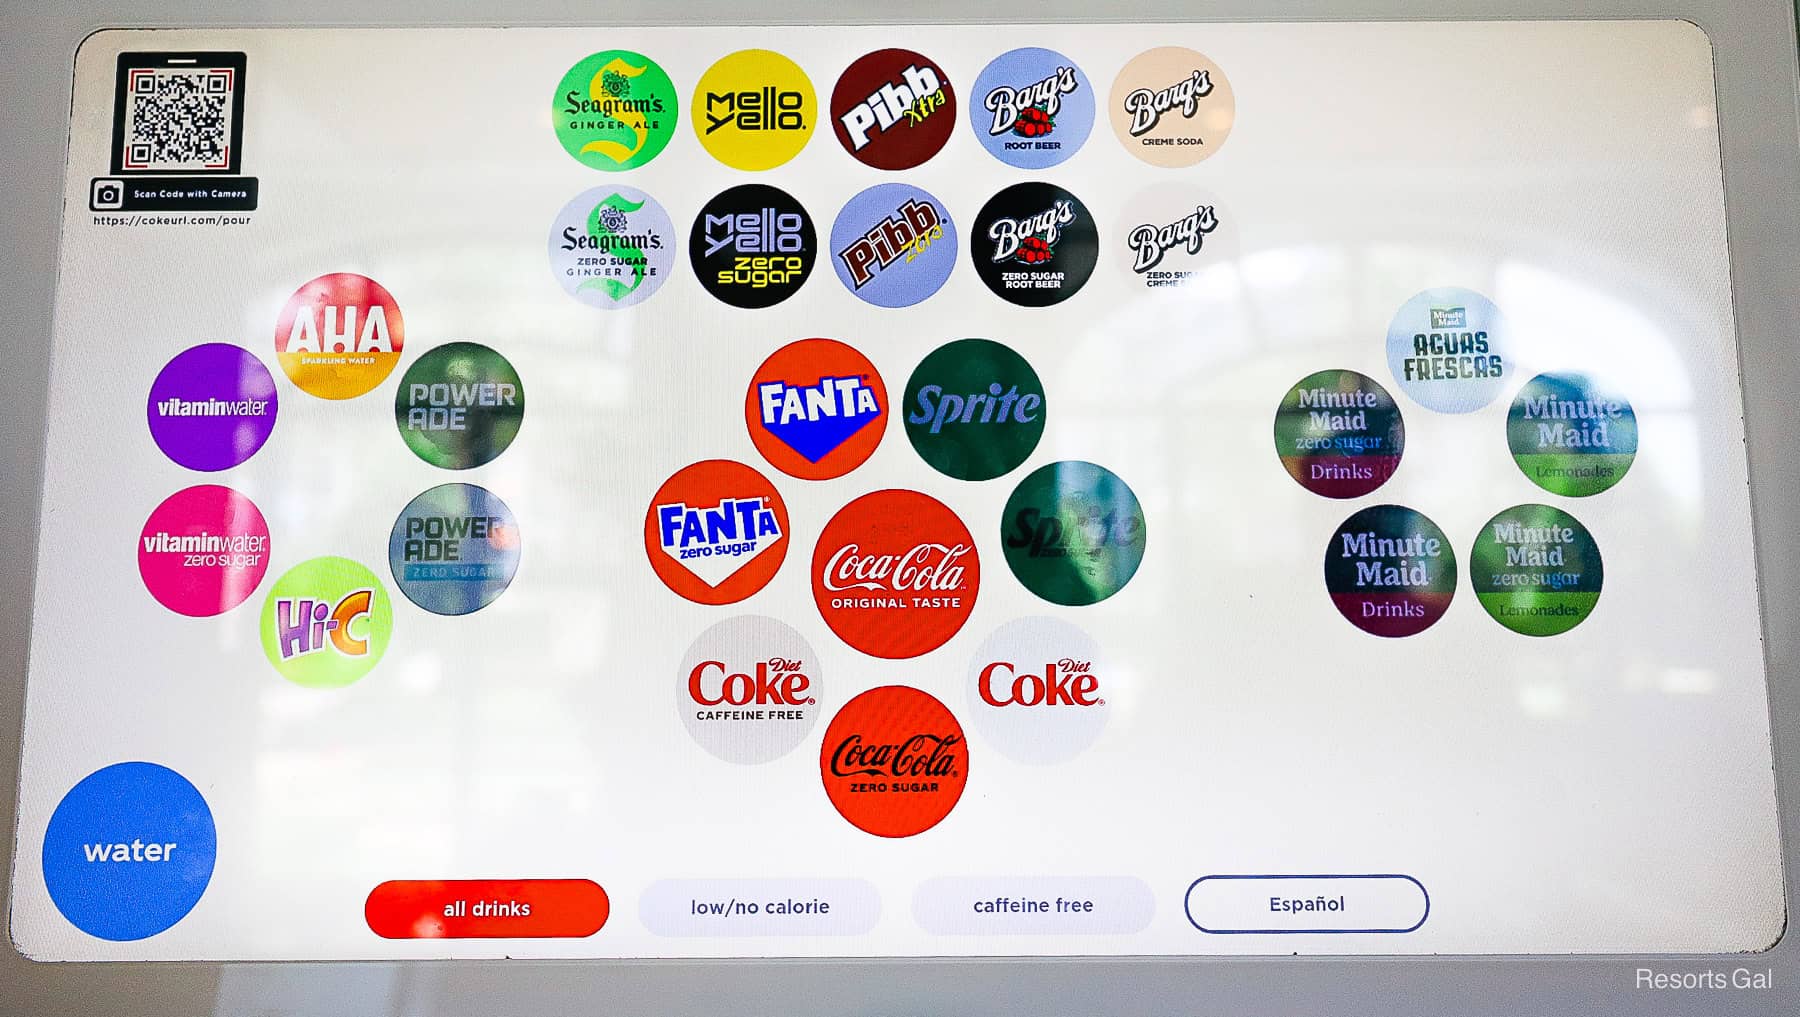 Port Orleans French Quarter has 8 Coca-Cola Freestyle machines. 